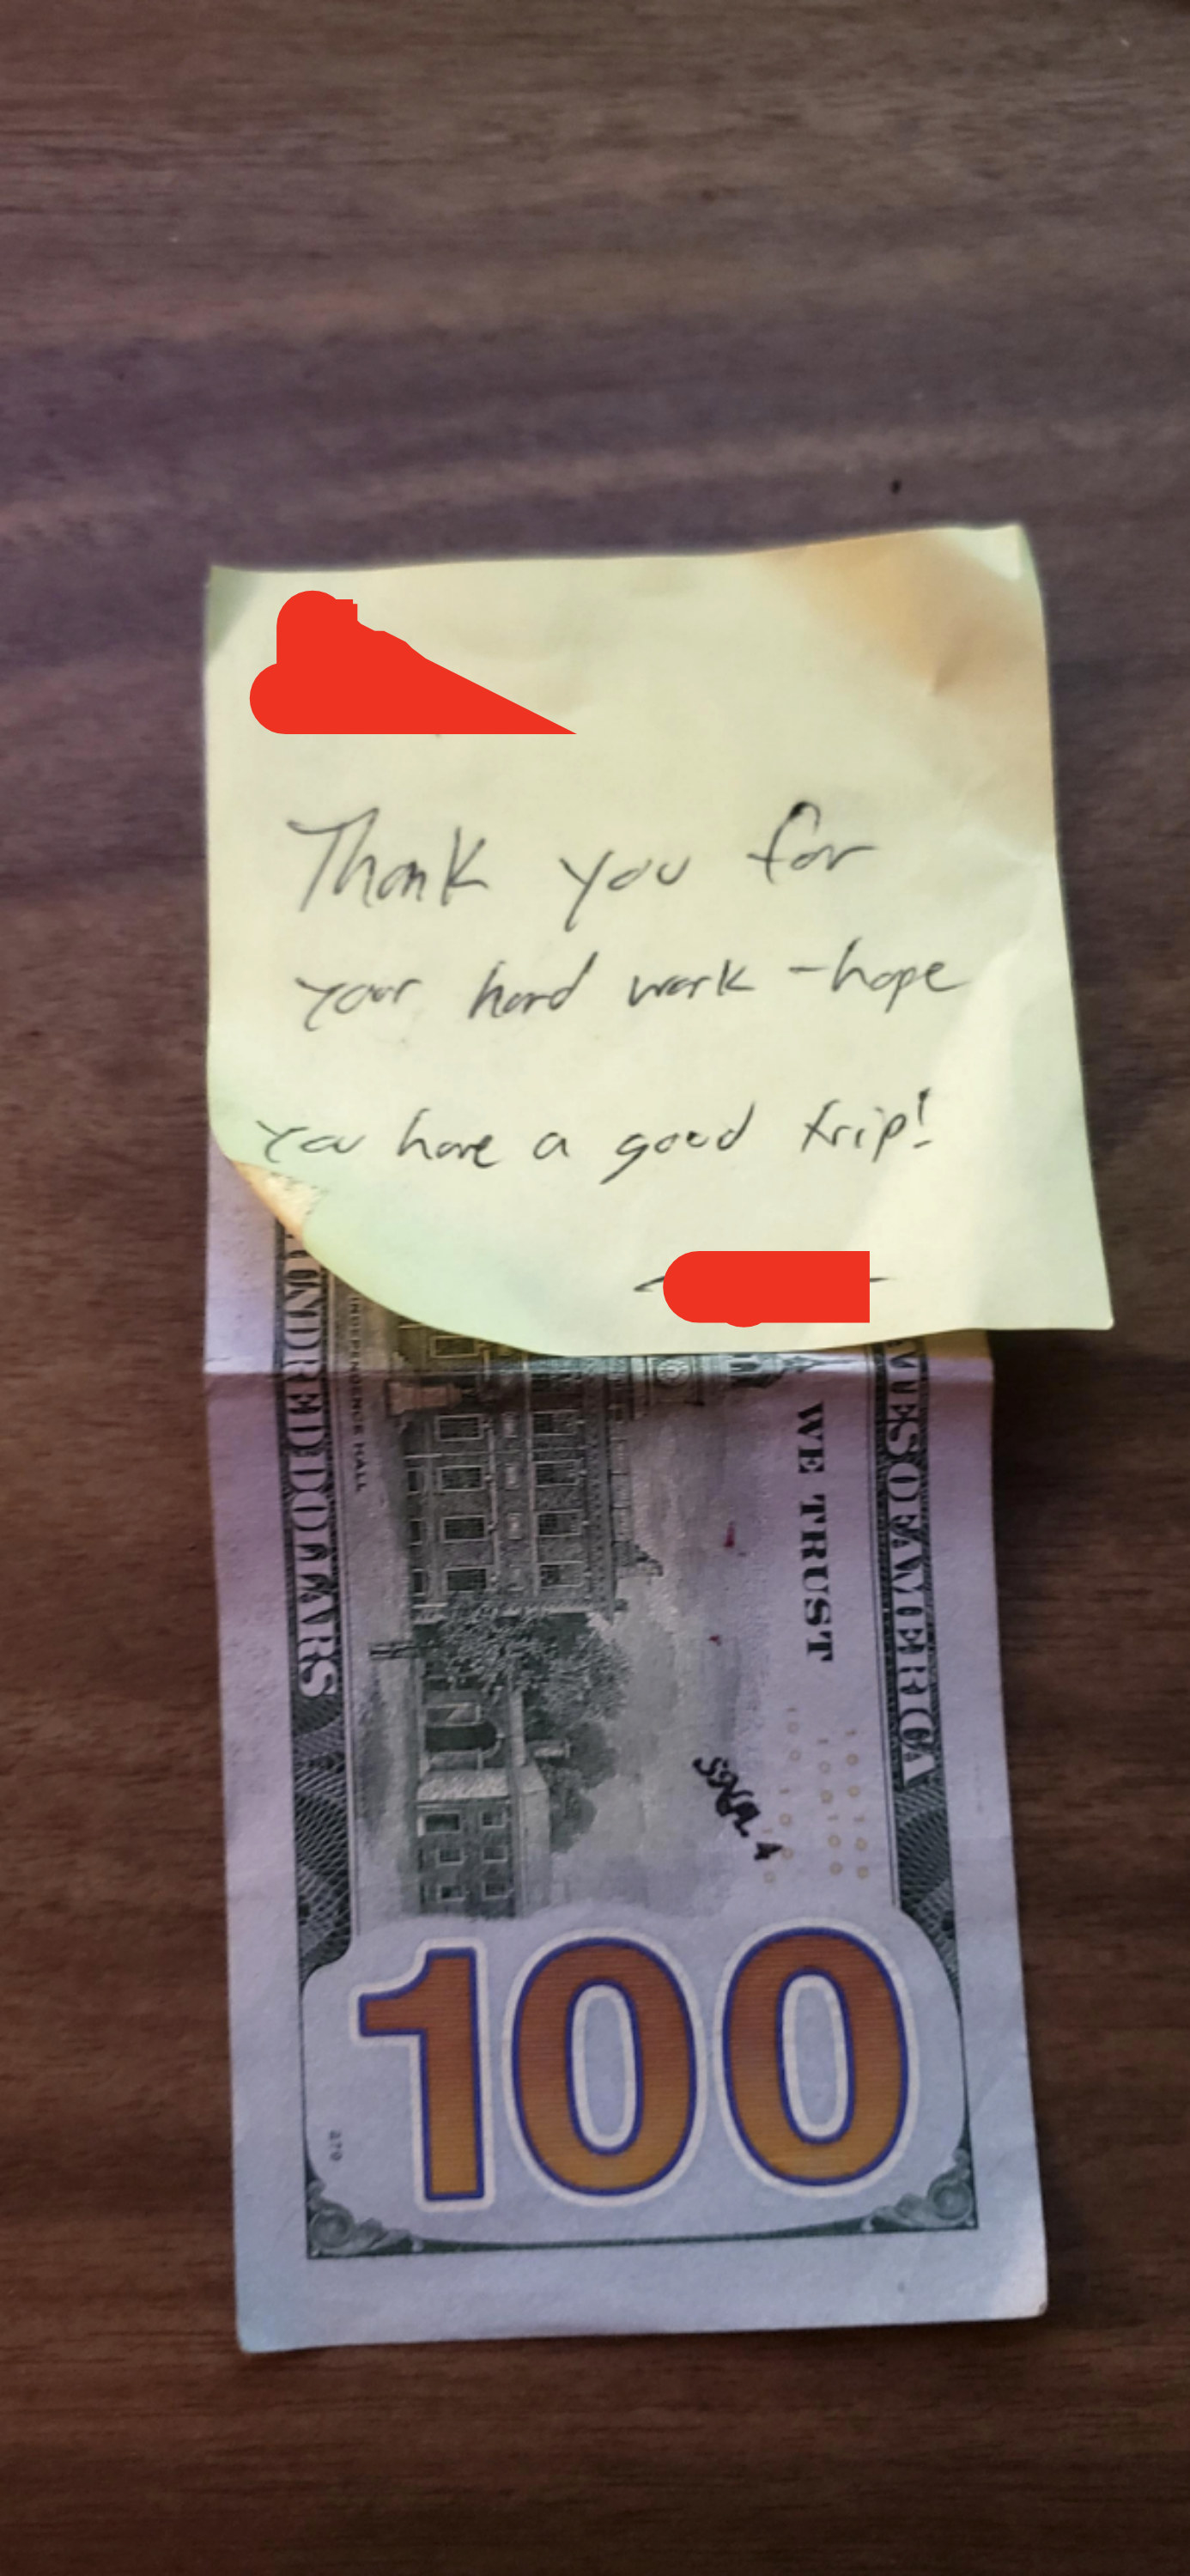 Boss giving employee extra money for their vacation